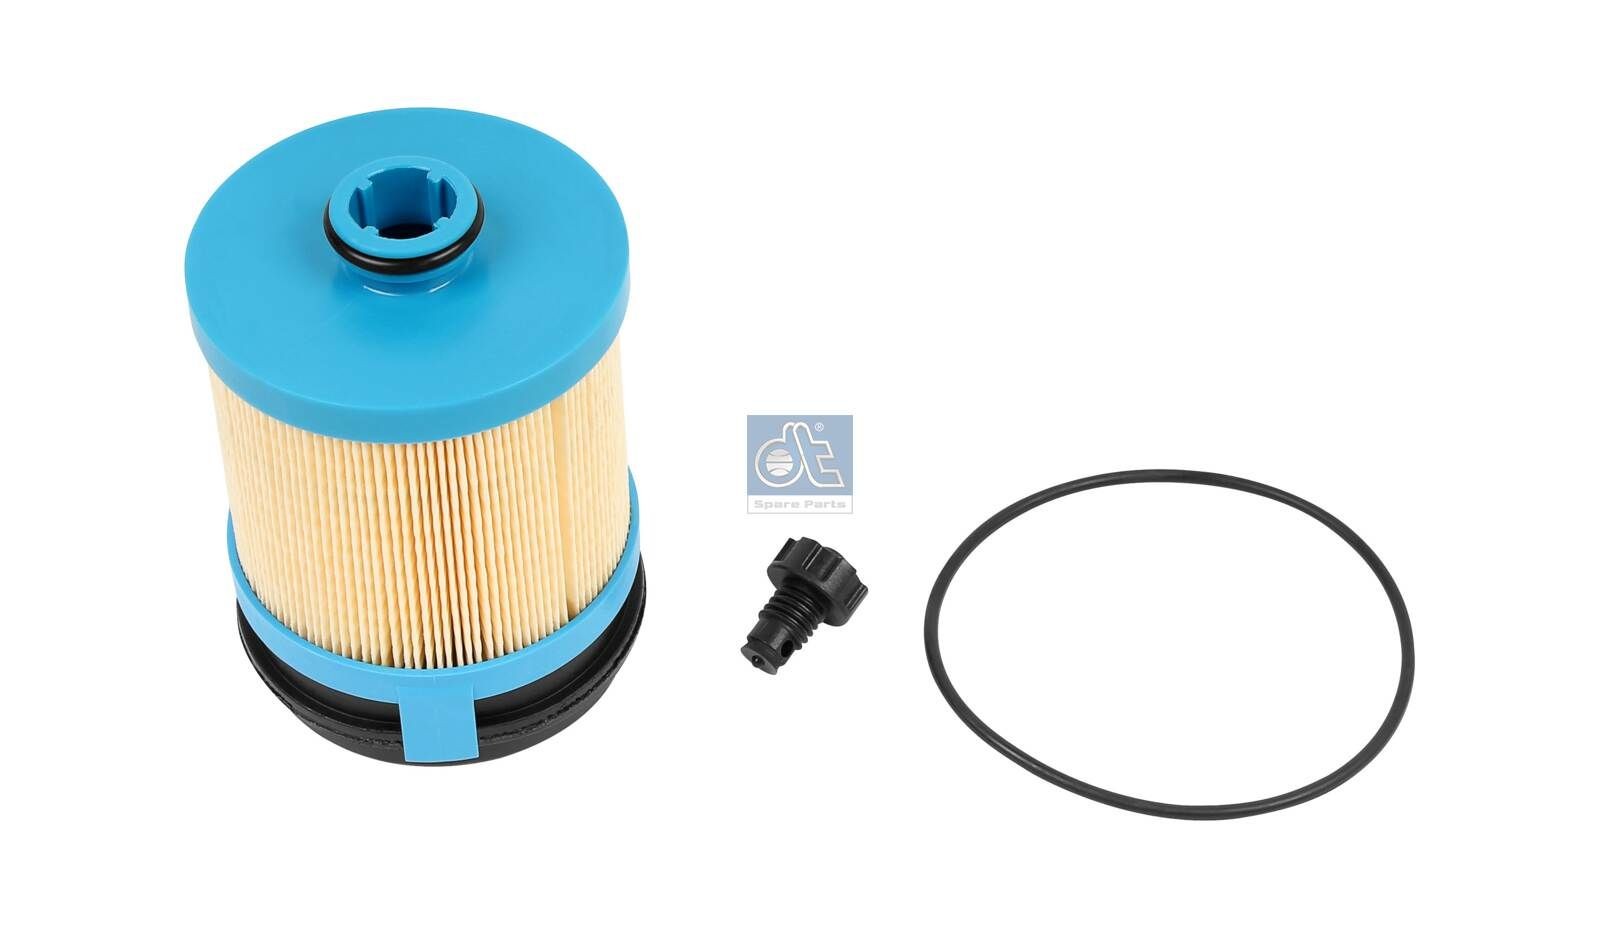 2.14900 DT Spare Parts Harnstofffilter ASTRA HD 7-C